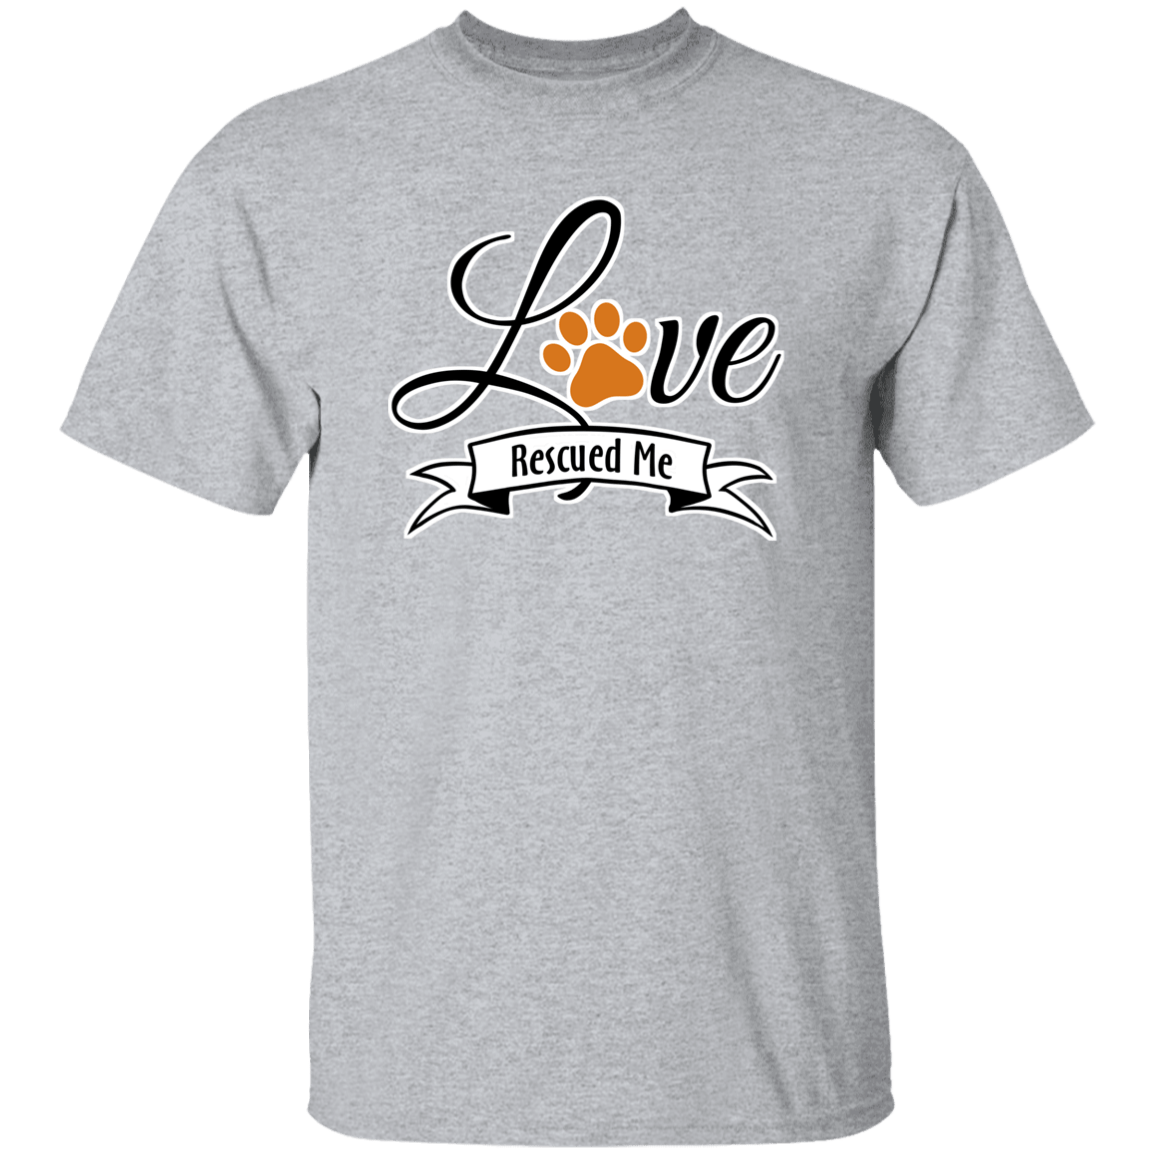 Love Rescued Me - Youth T-Shirt.